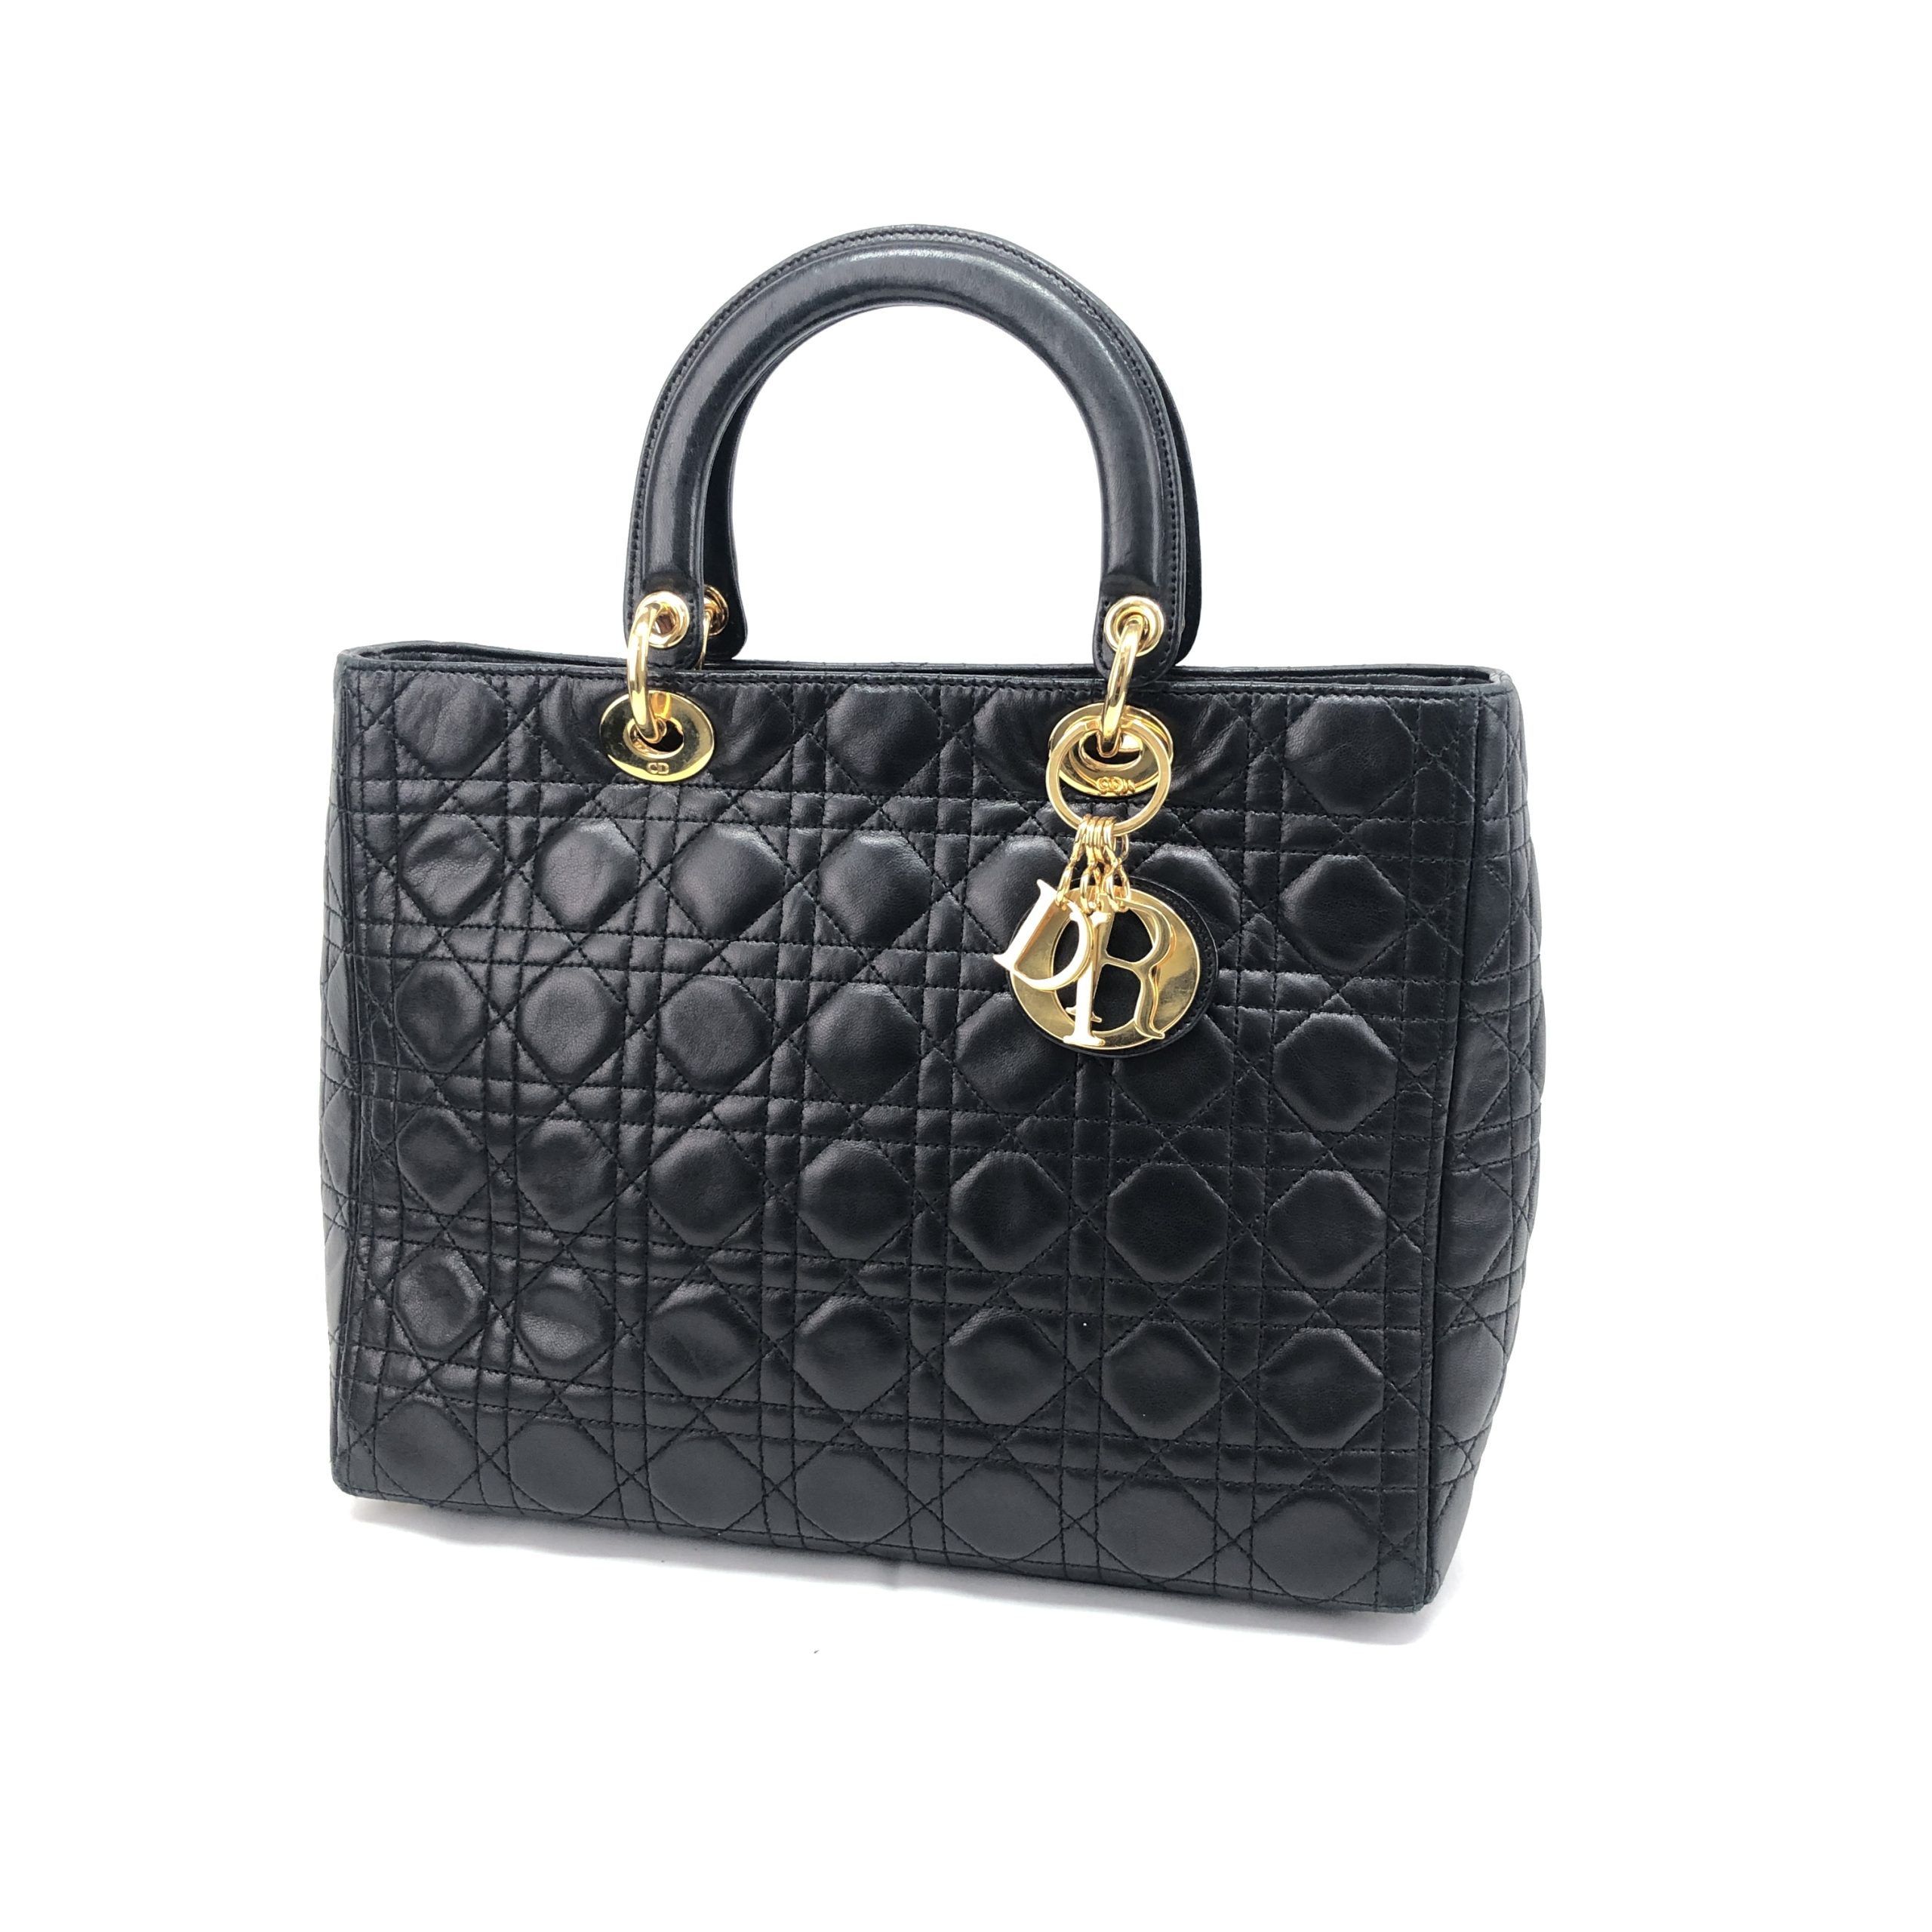 You are currently viewing Dior Lady Dior Hand Bag